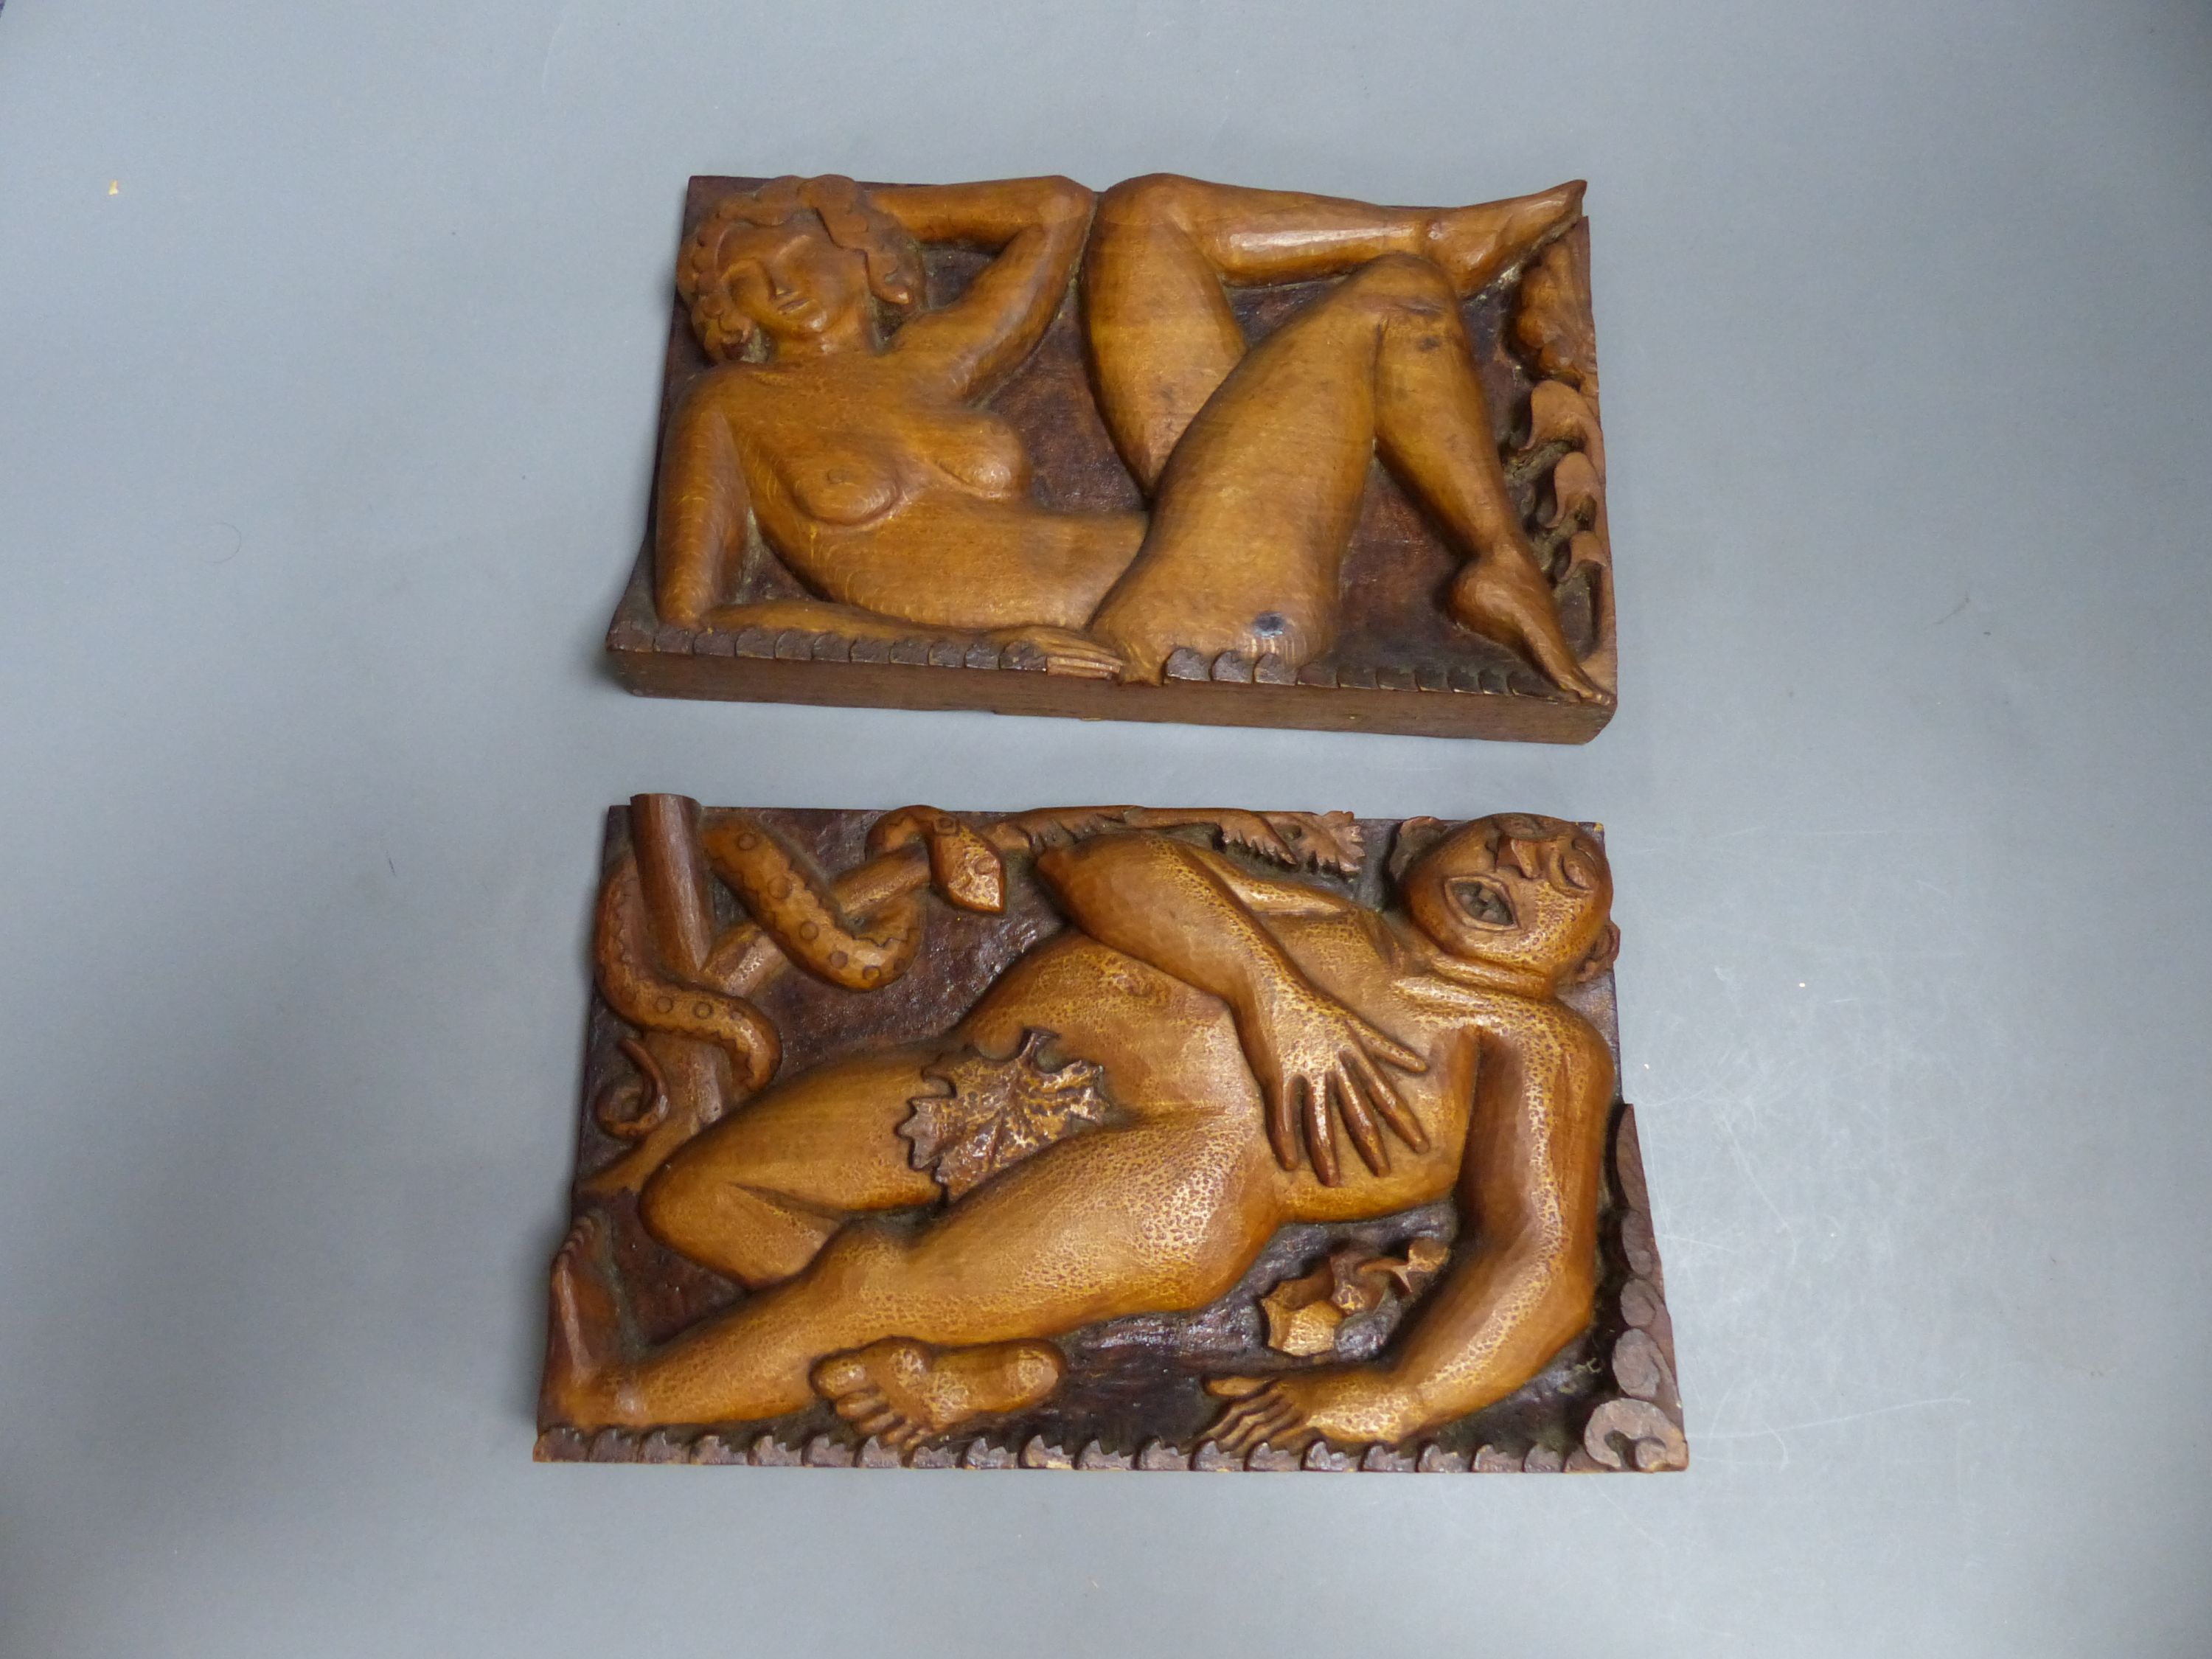 R.H. Harris, two carved wood panels, Adam and Eve, signed and dated 1939, 15 x 25cm